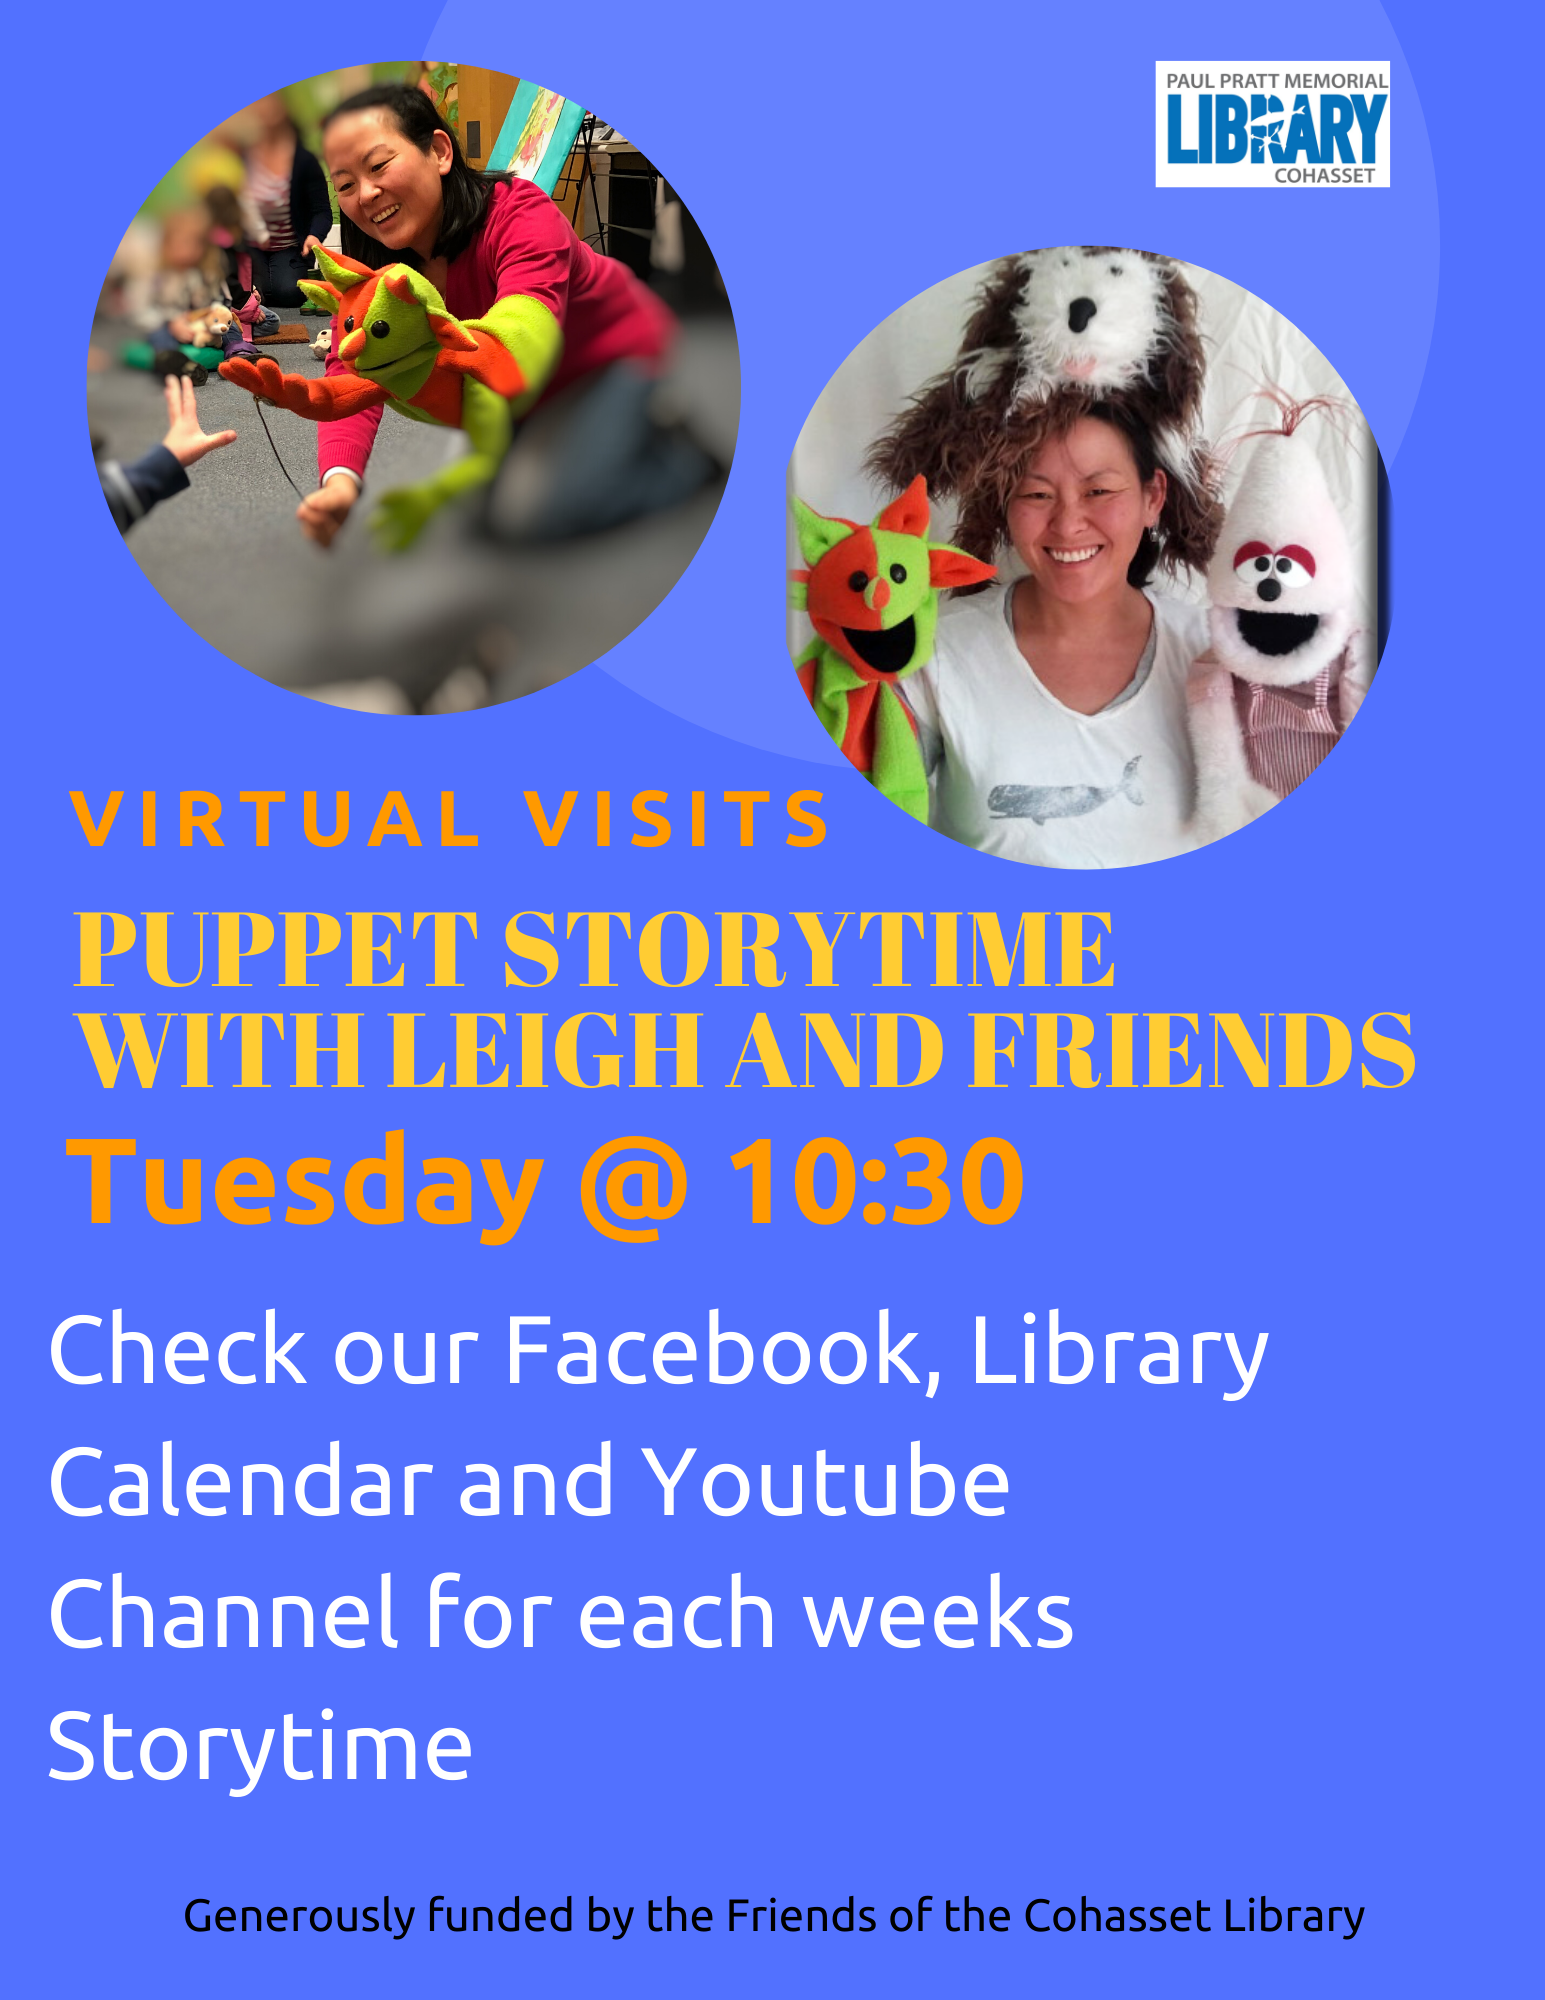 Virtual puppet storytime Tuesdays @ 10:30